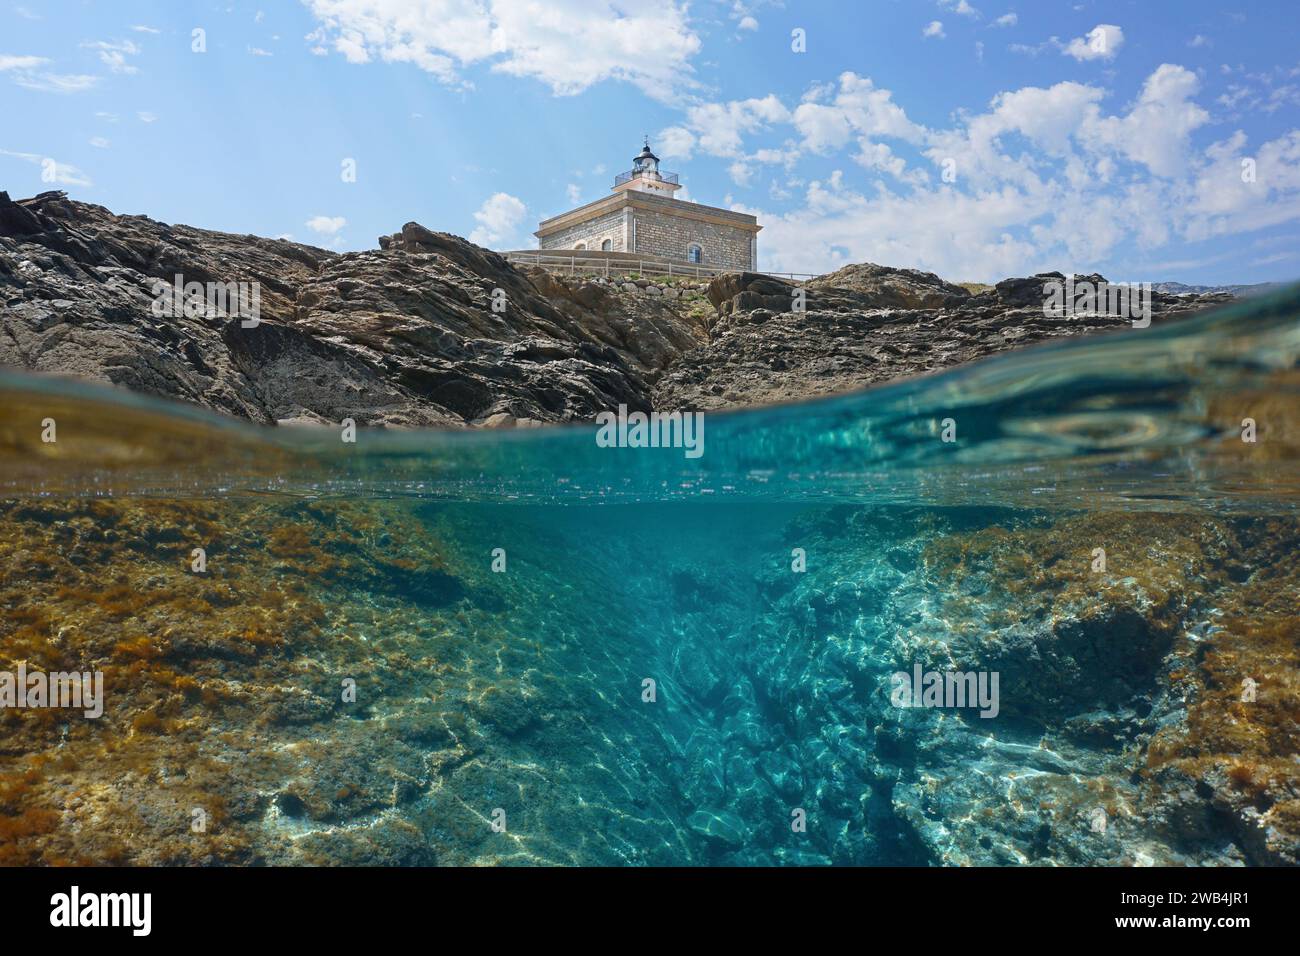 Lighthouse on the Mediterranean coast in Spain with rocky shore over and under water surface, split level view, natural scene, Costa Brava, Catalonia Stock Photo